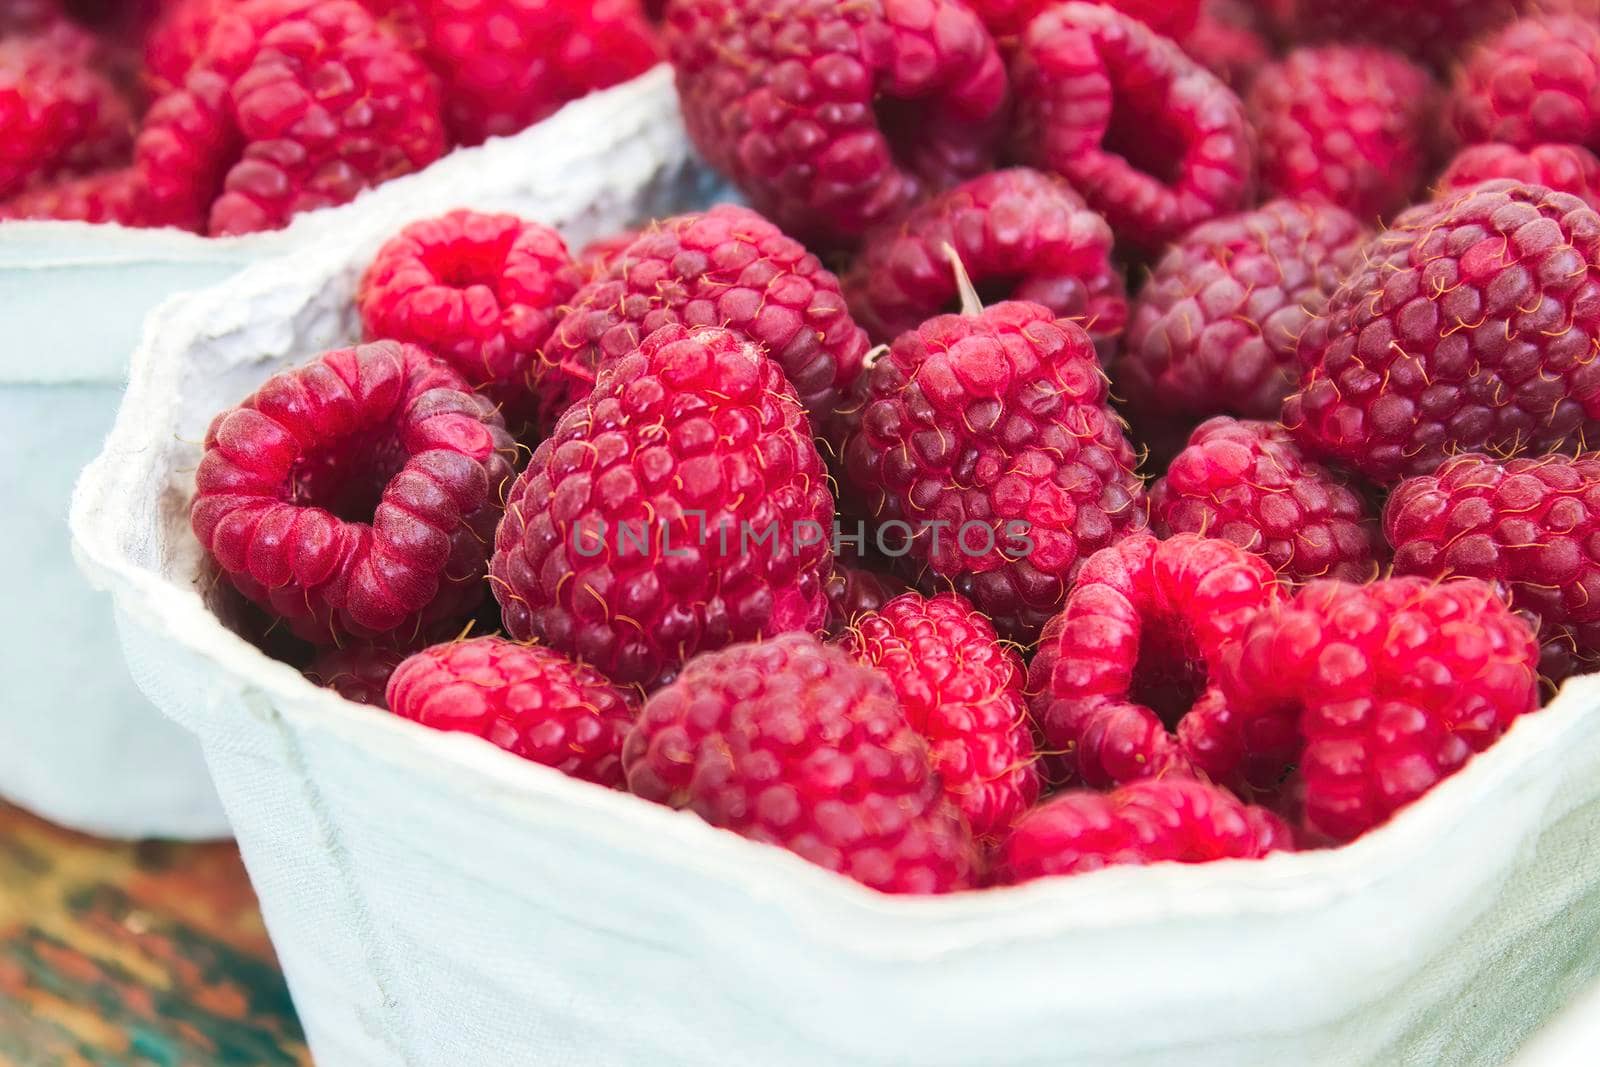 Close-up of a container of fresh, red, ripe raspberries at an open-air food market